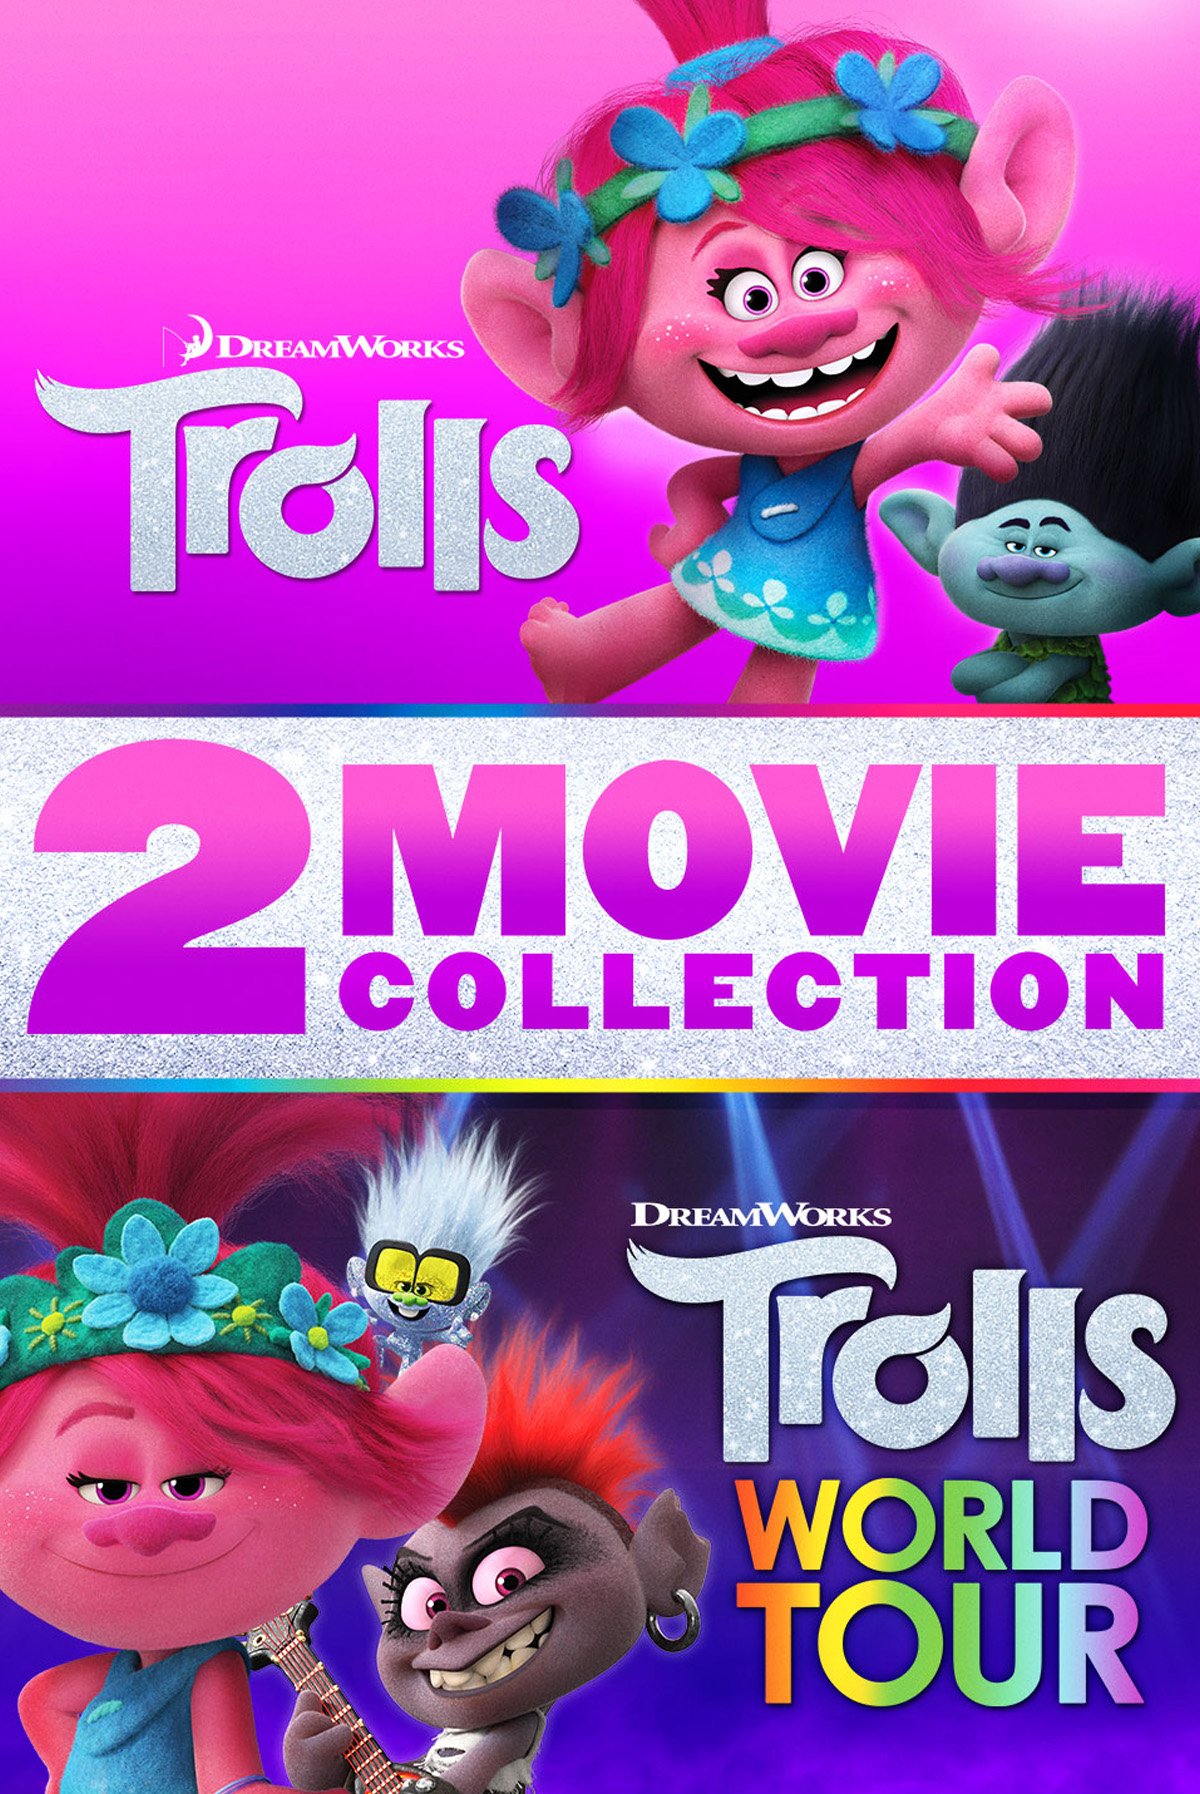 Now Player - Trolls 2-Movie Collection